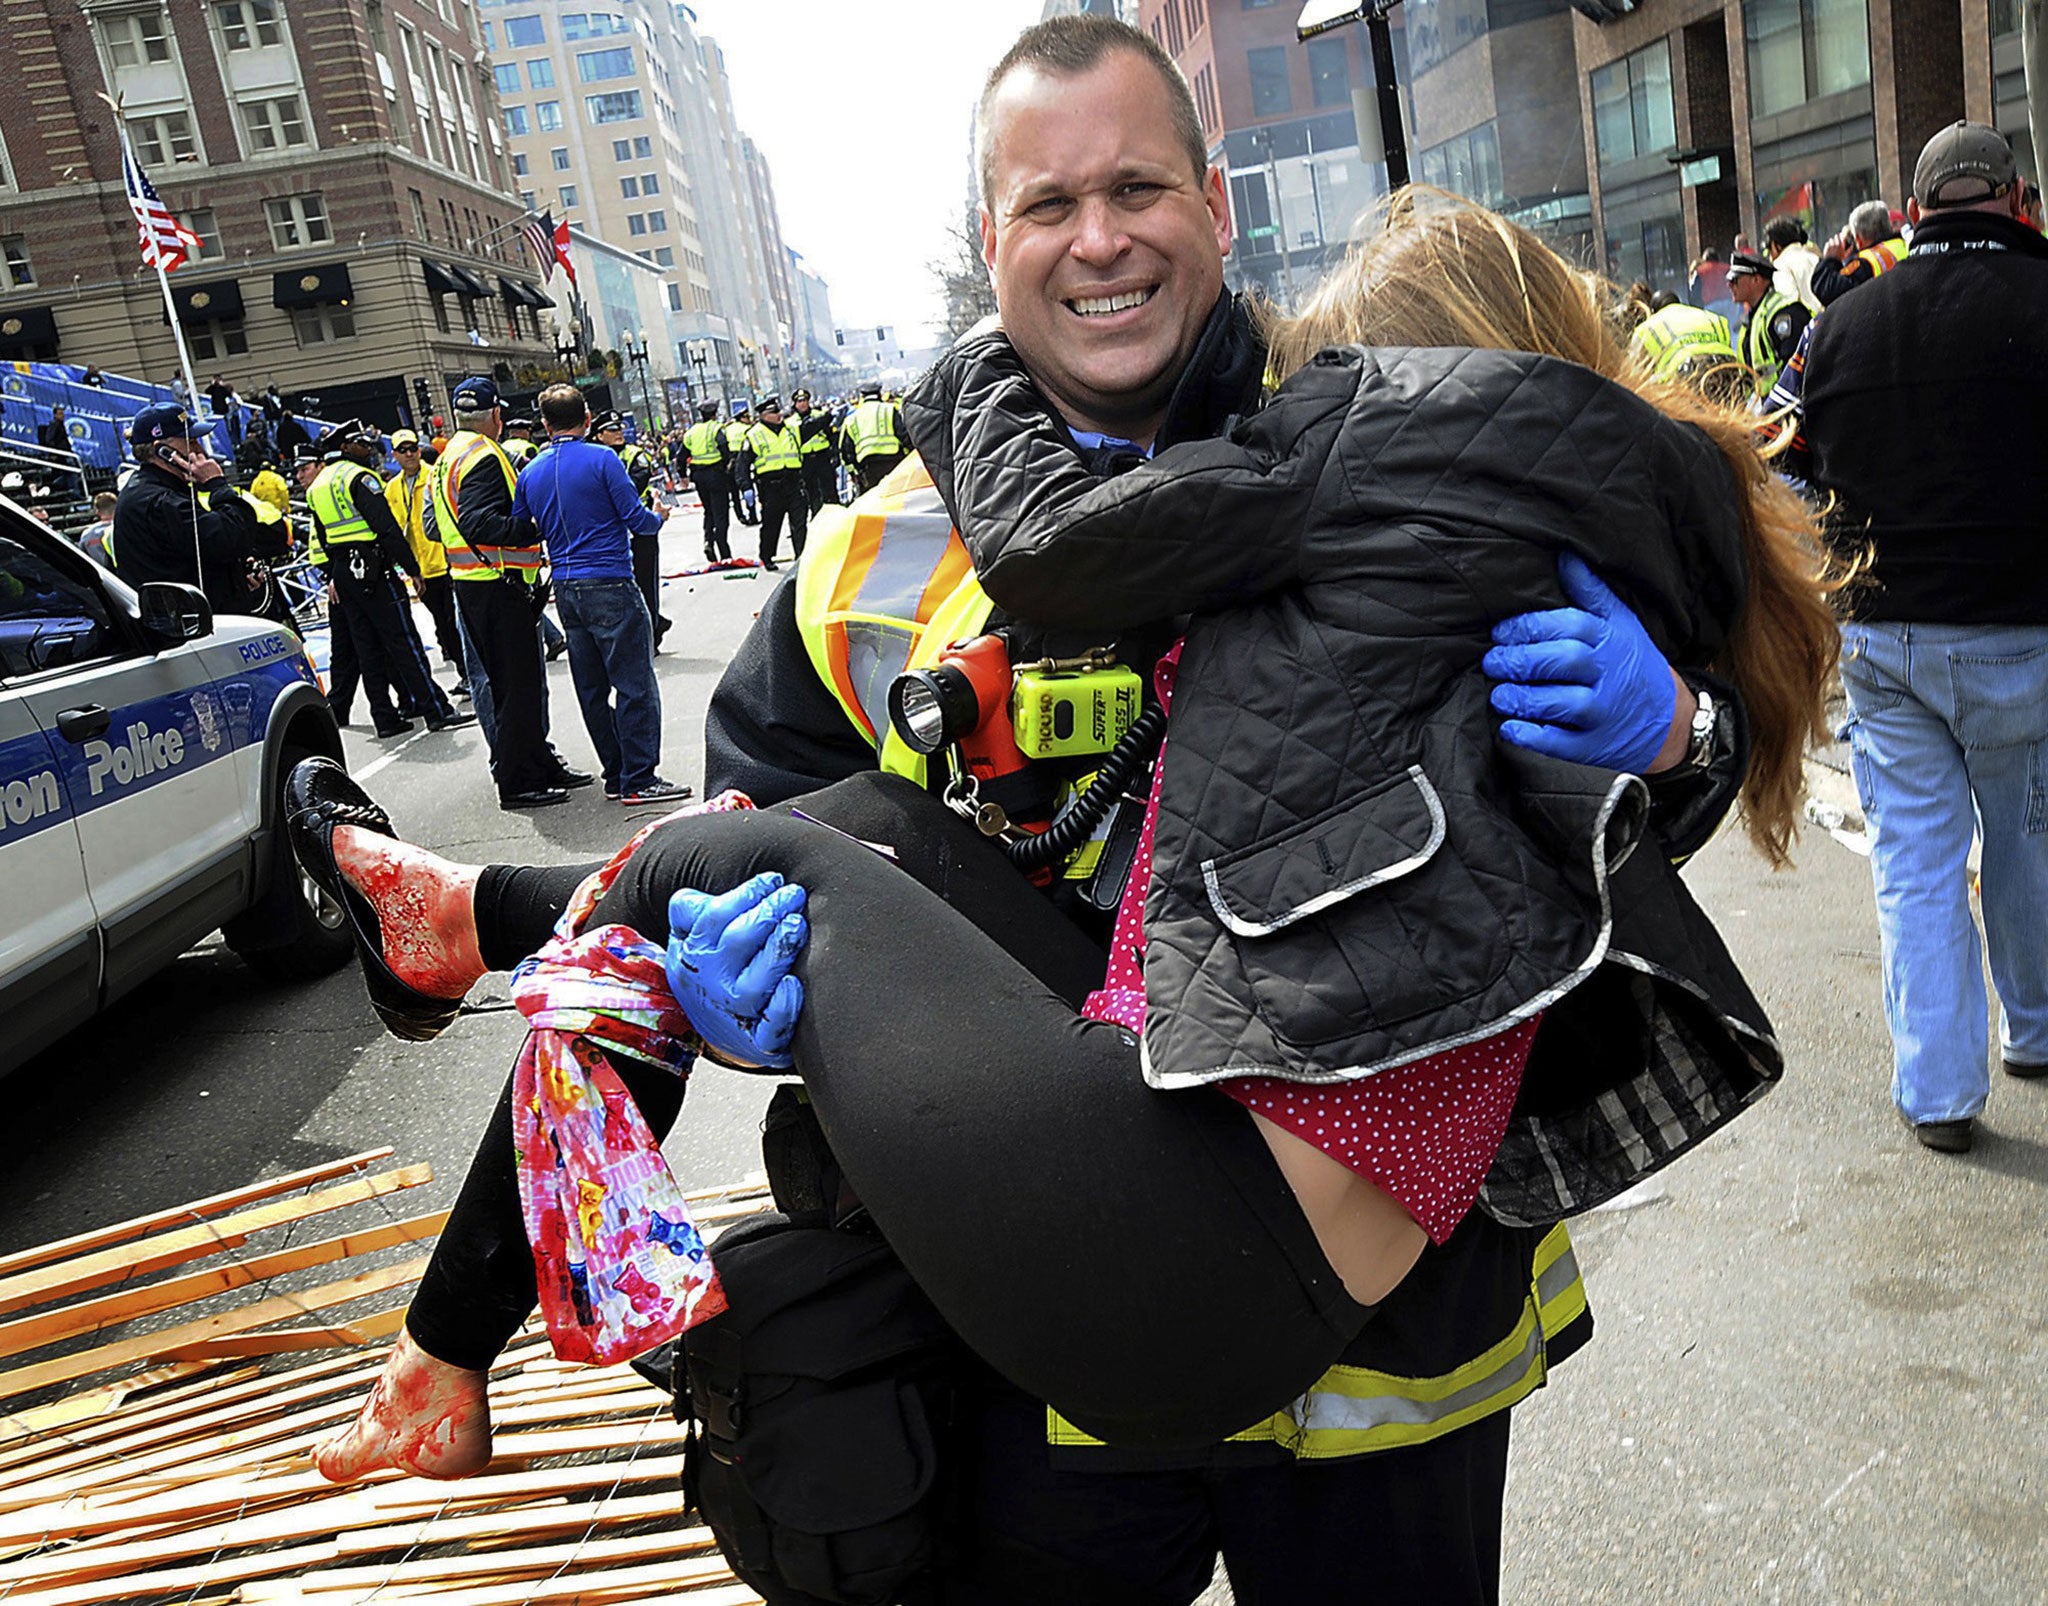 Boston firefighter James Plourde carries Victoria McGrath from the scene of the bombing in April 2013